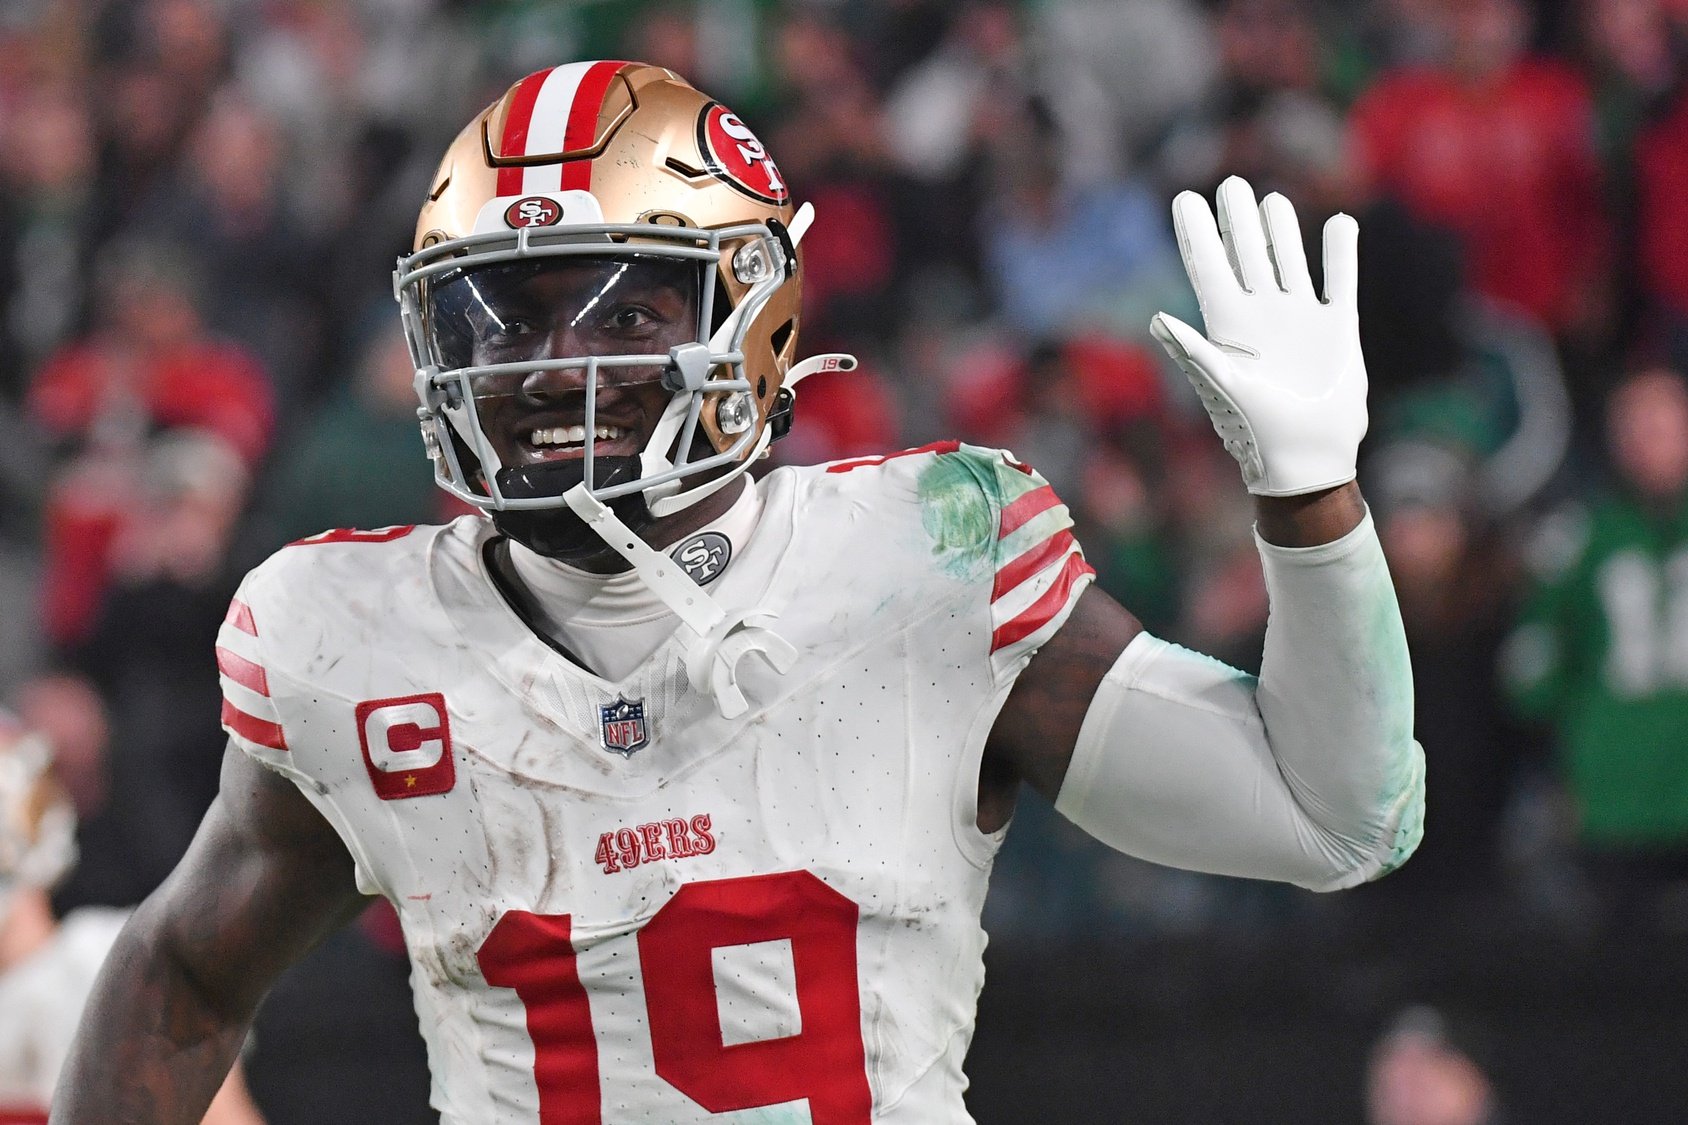 San Francisco 49ers wide receiver Deebo Samuel (19) waves goodbye to the Philadelphia Eagles fans after scoring a touchdown during the fourth quarter at Lincoln Financial Field.